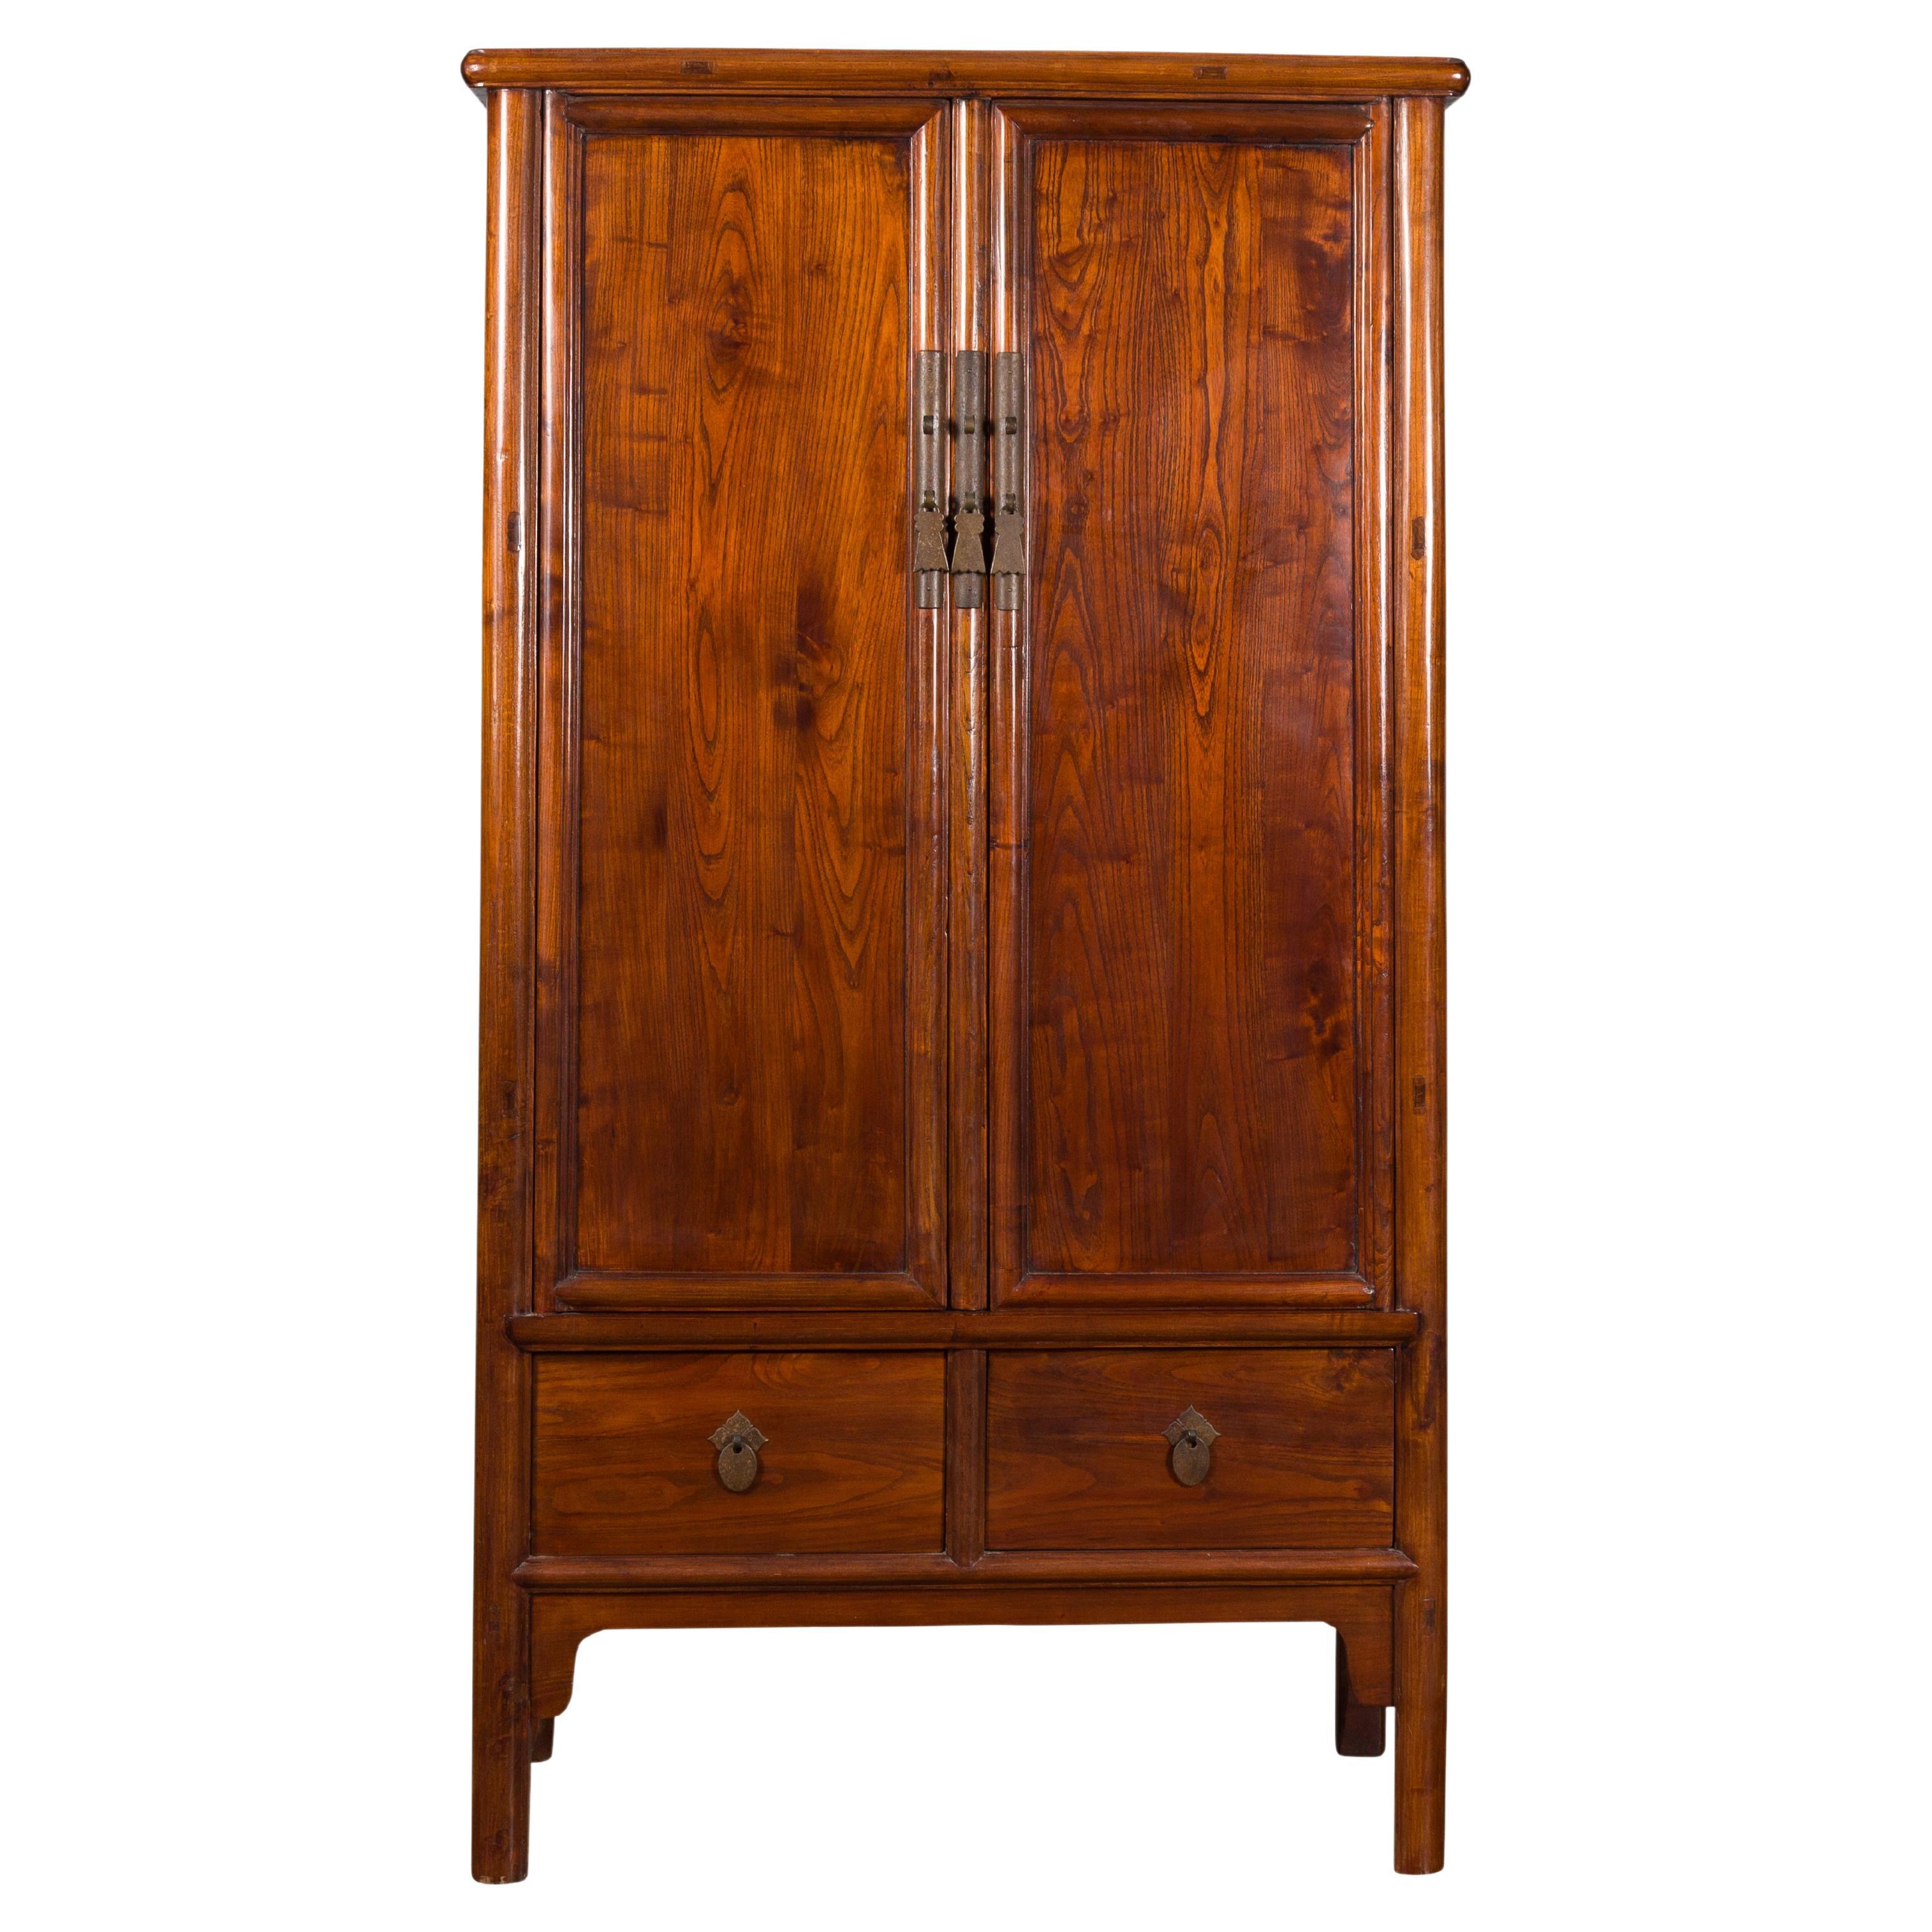 Chinese 19th Century Qing Dynasty Period Elmwood Cabinet with Doors and Drawers